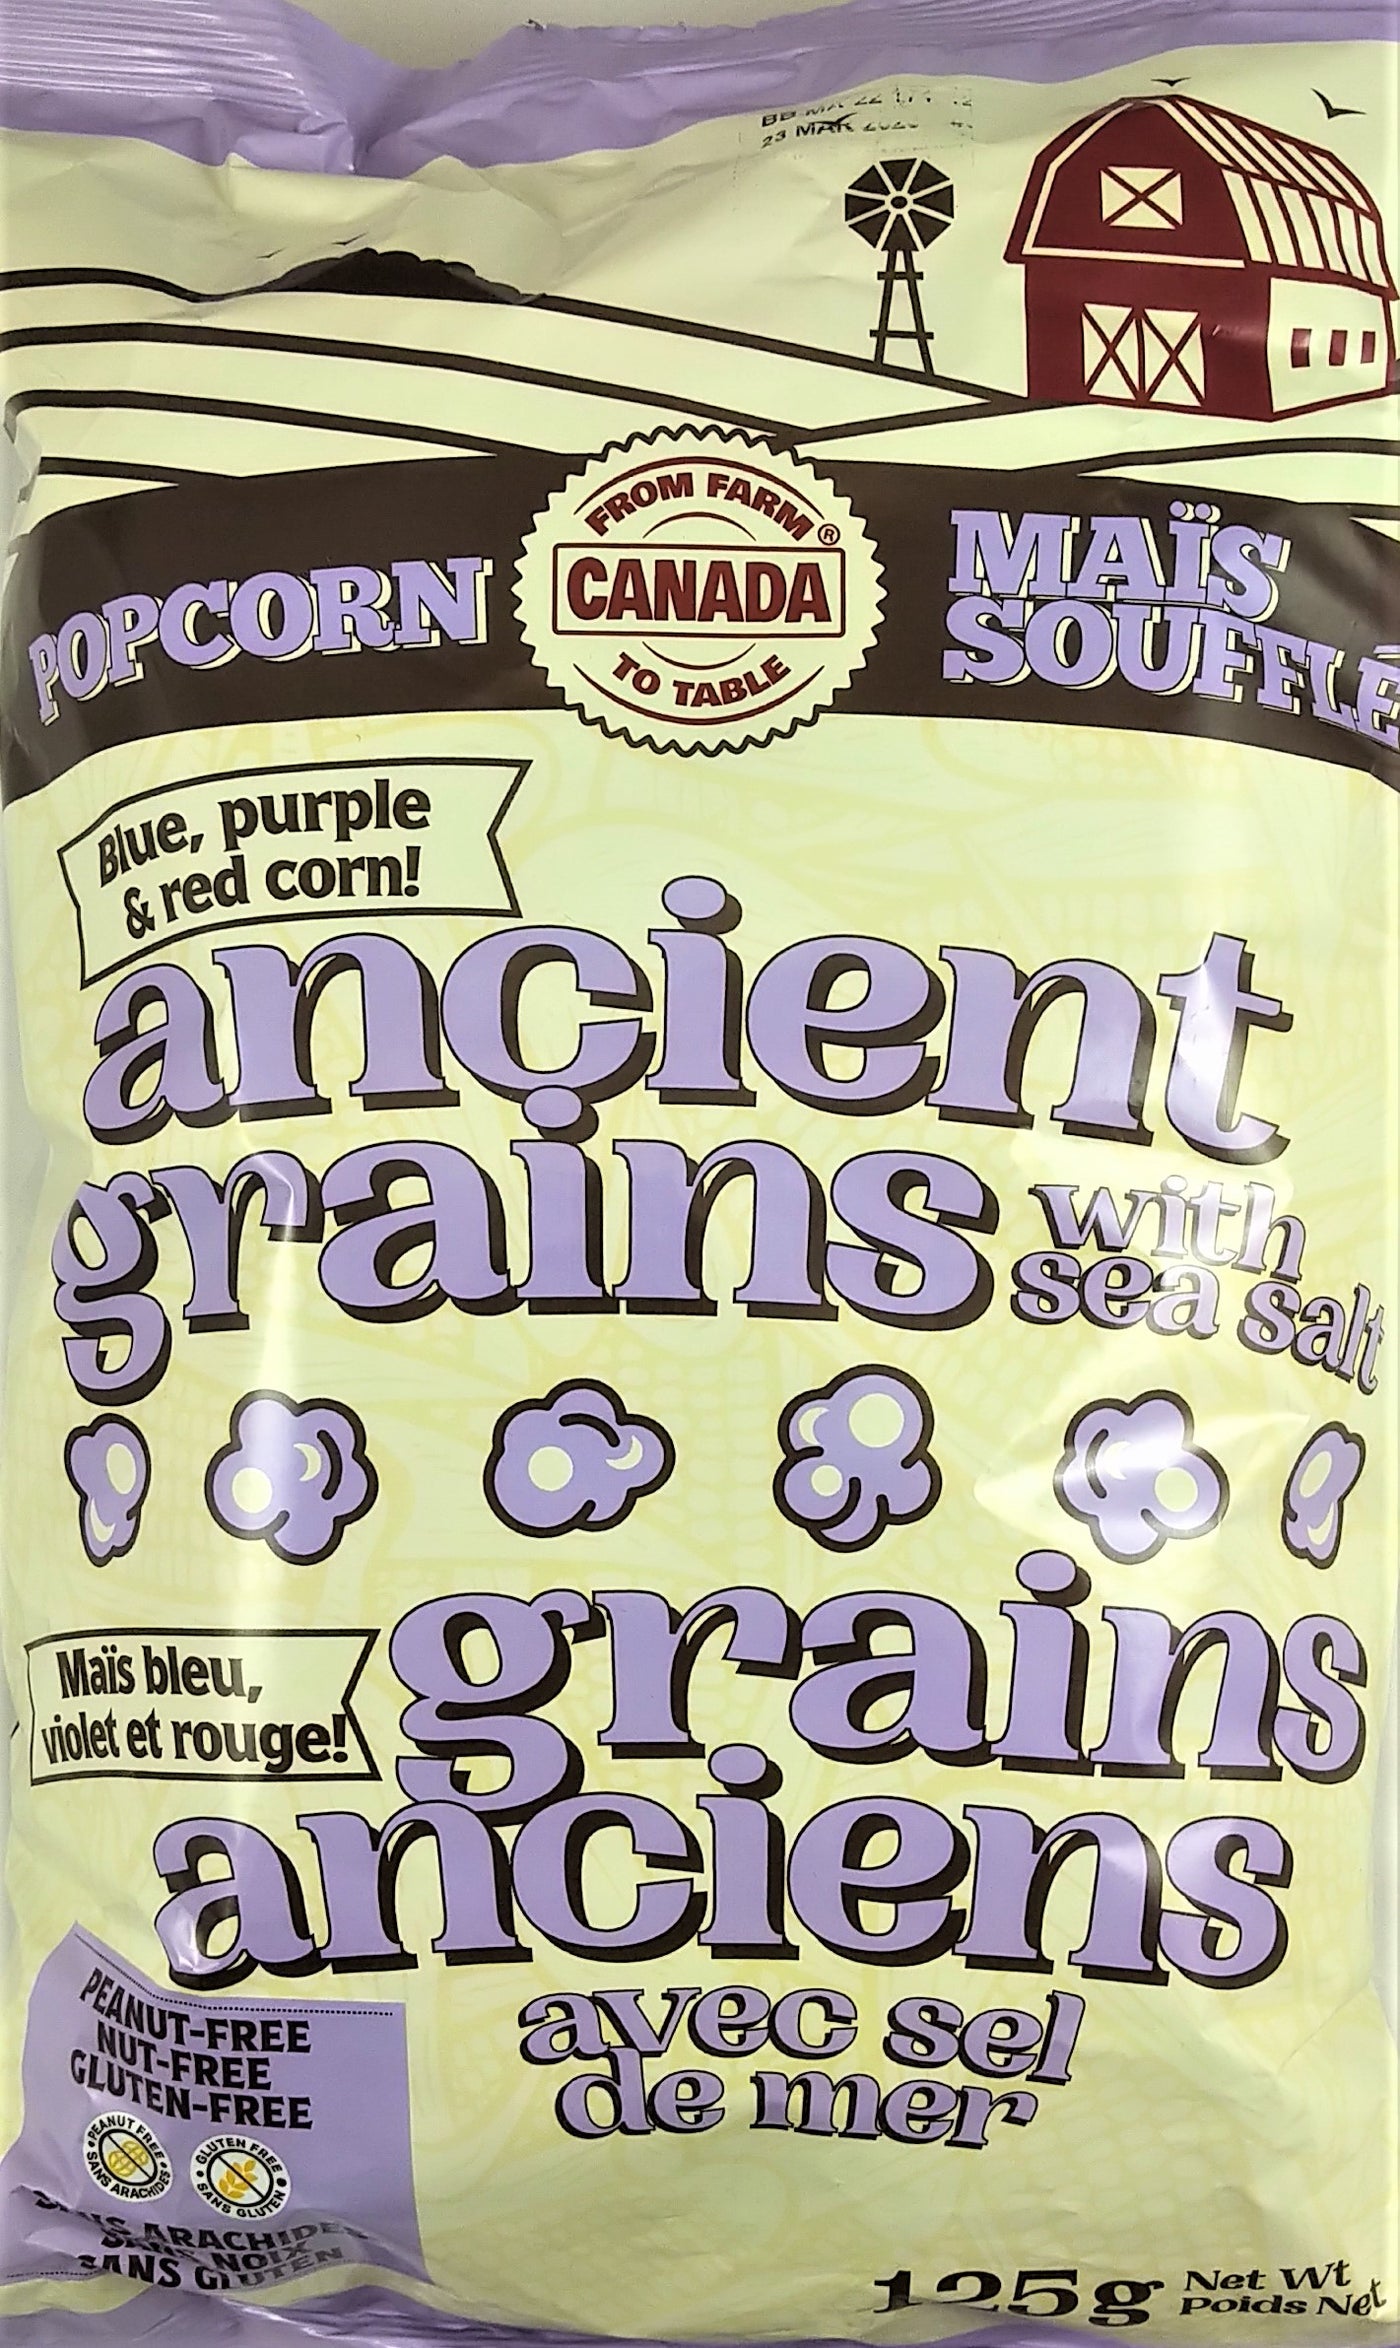 From Farm to Table Popcorn Ancient Grain 12/125